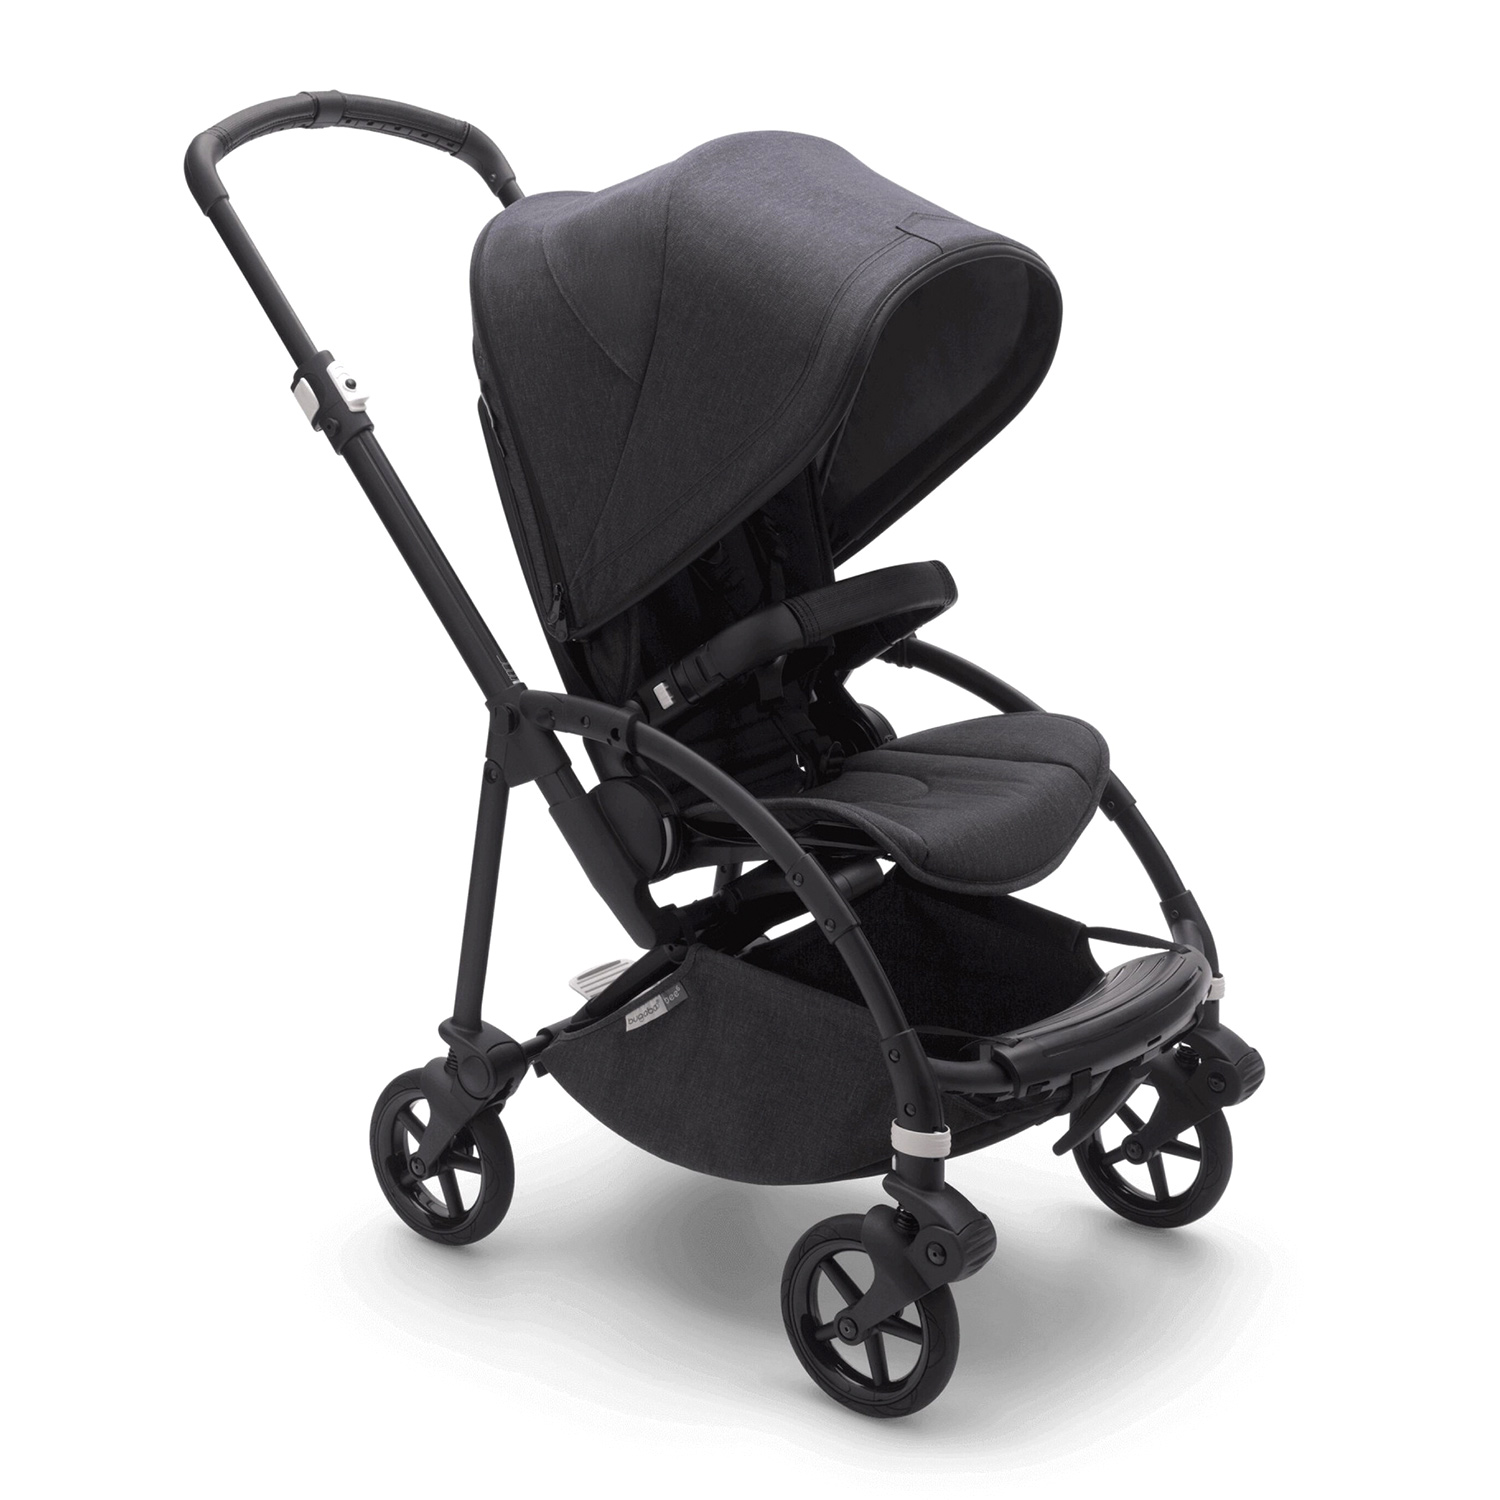 Коляска прогулочная Bee6 Complete MINERAL BLACK/WASHED BL Bugaboo коляска bugaboo 2 в 1 donkey 5 mono complete mineral